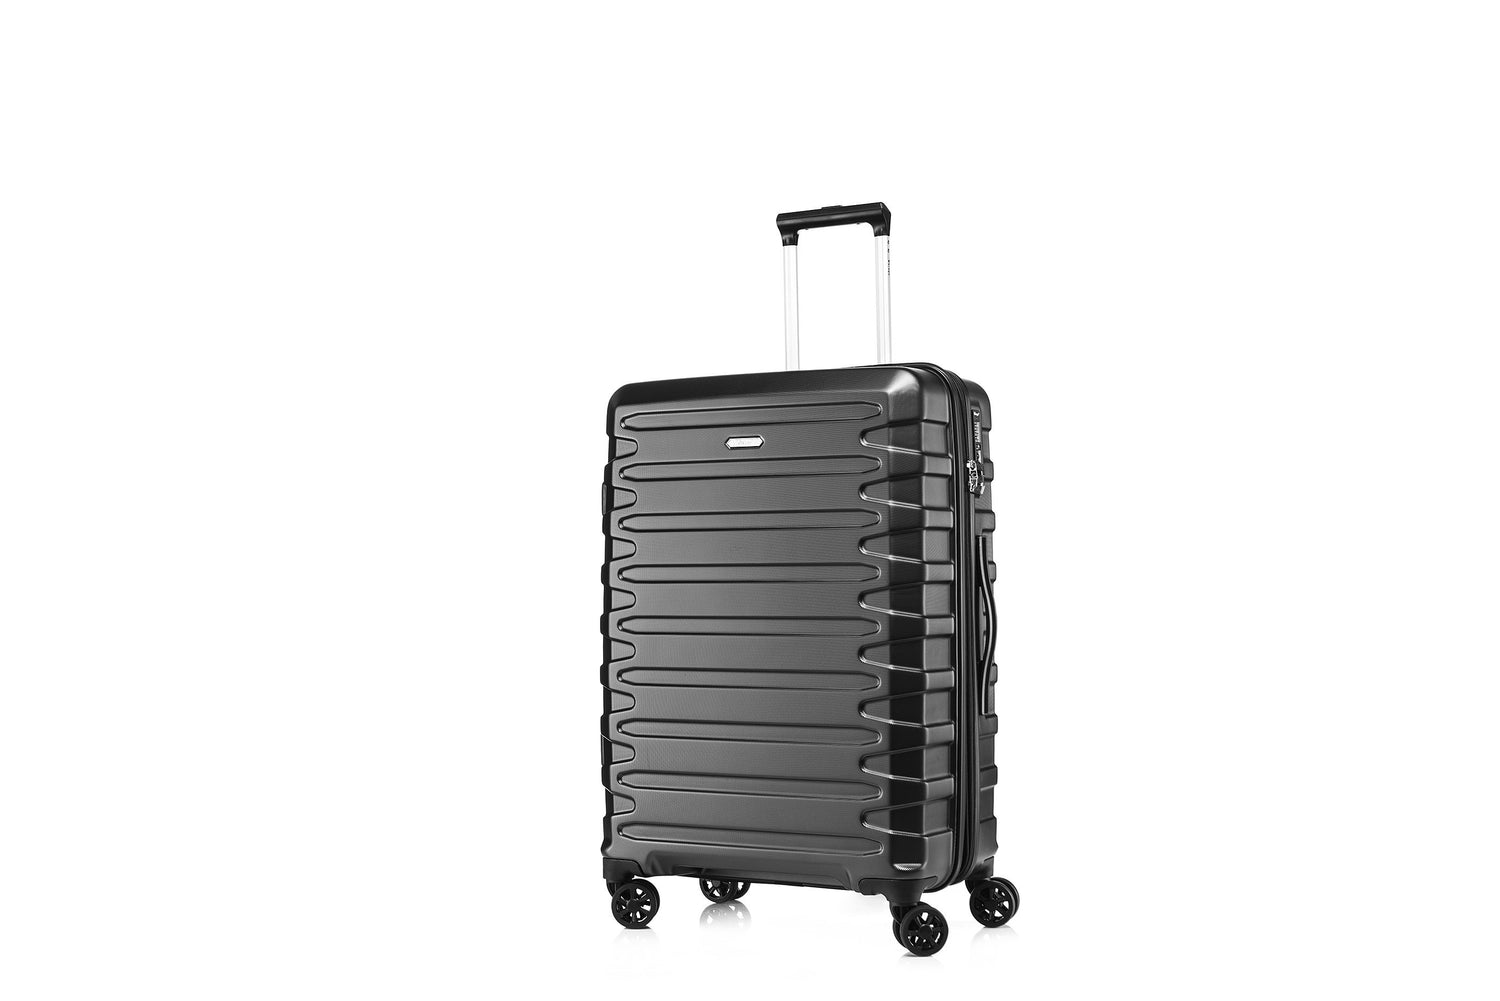 Crust Suitcase by  Adelphi.